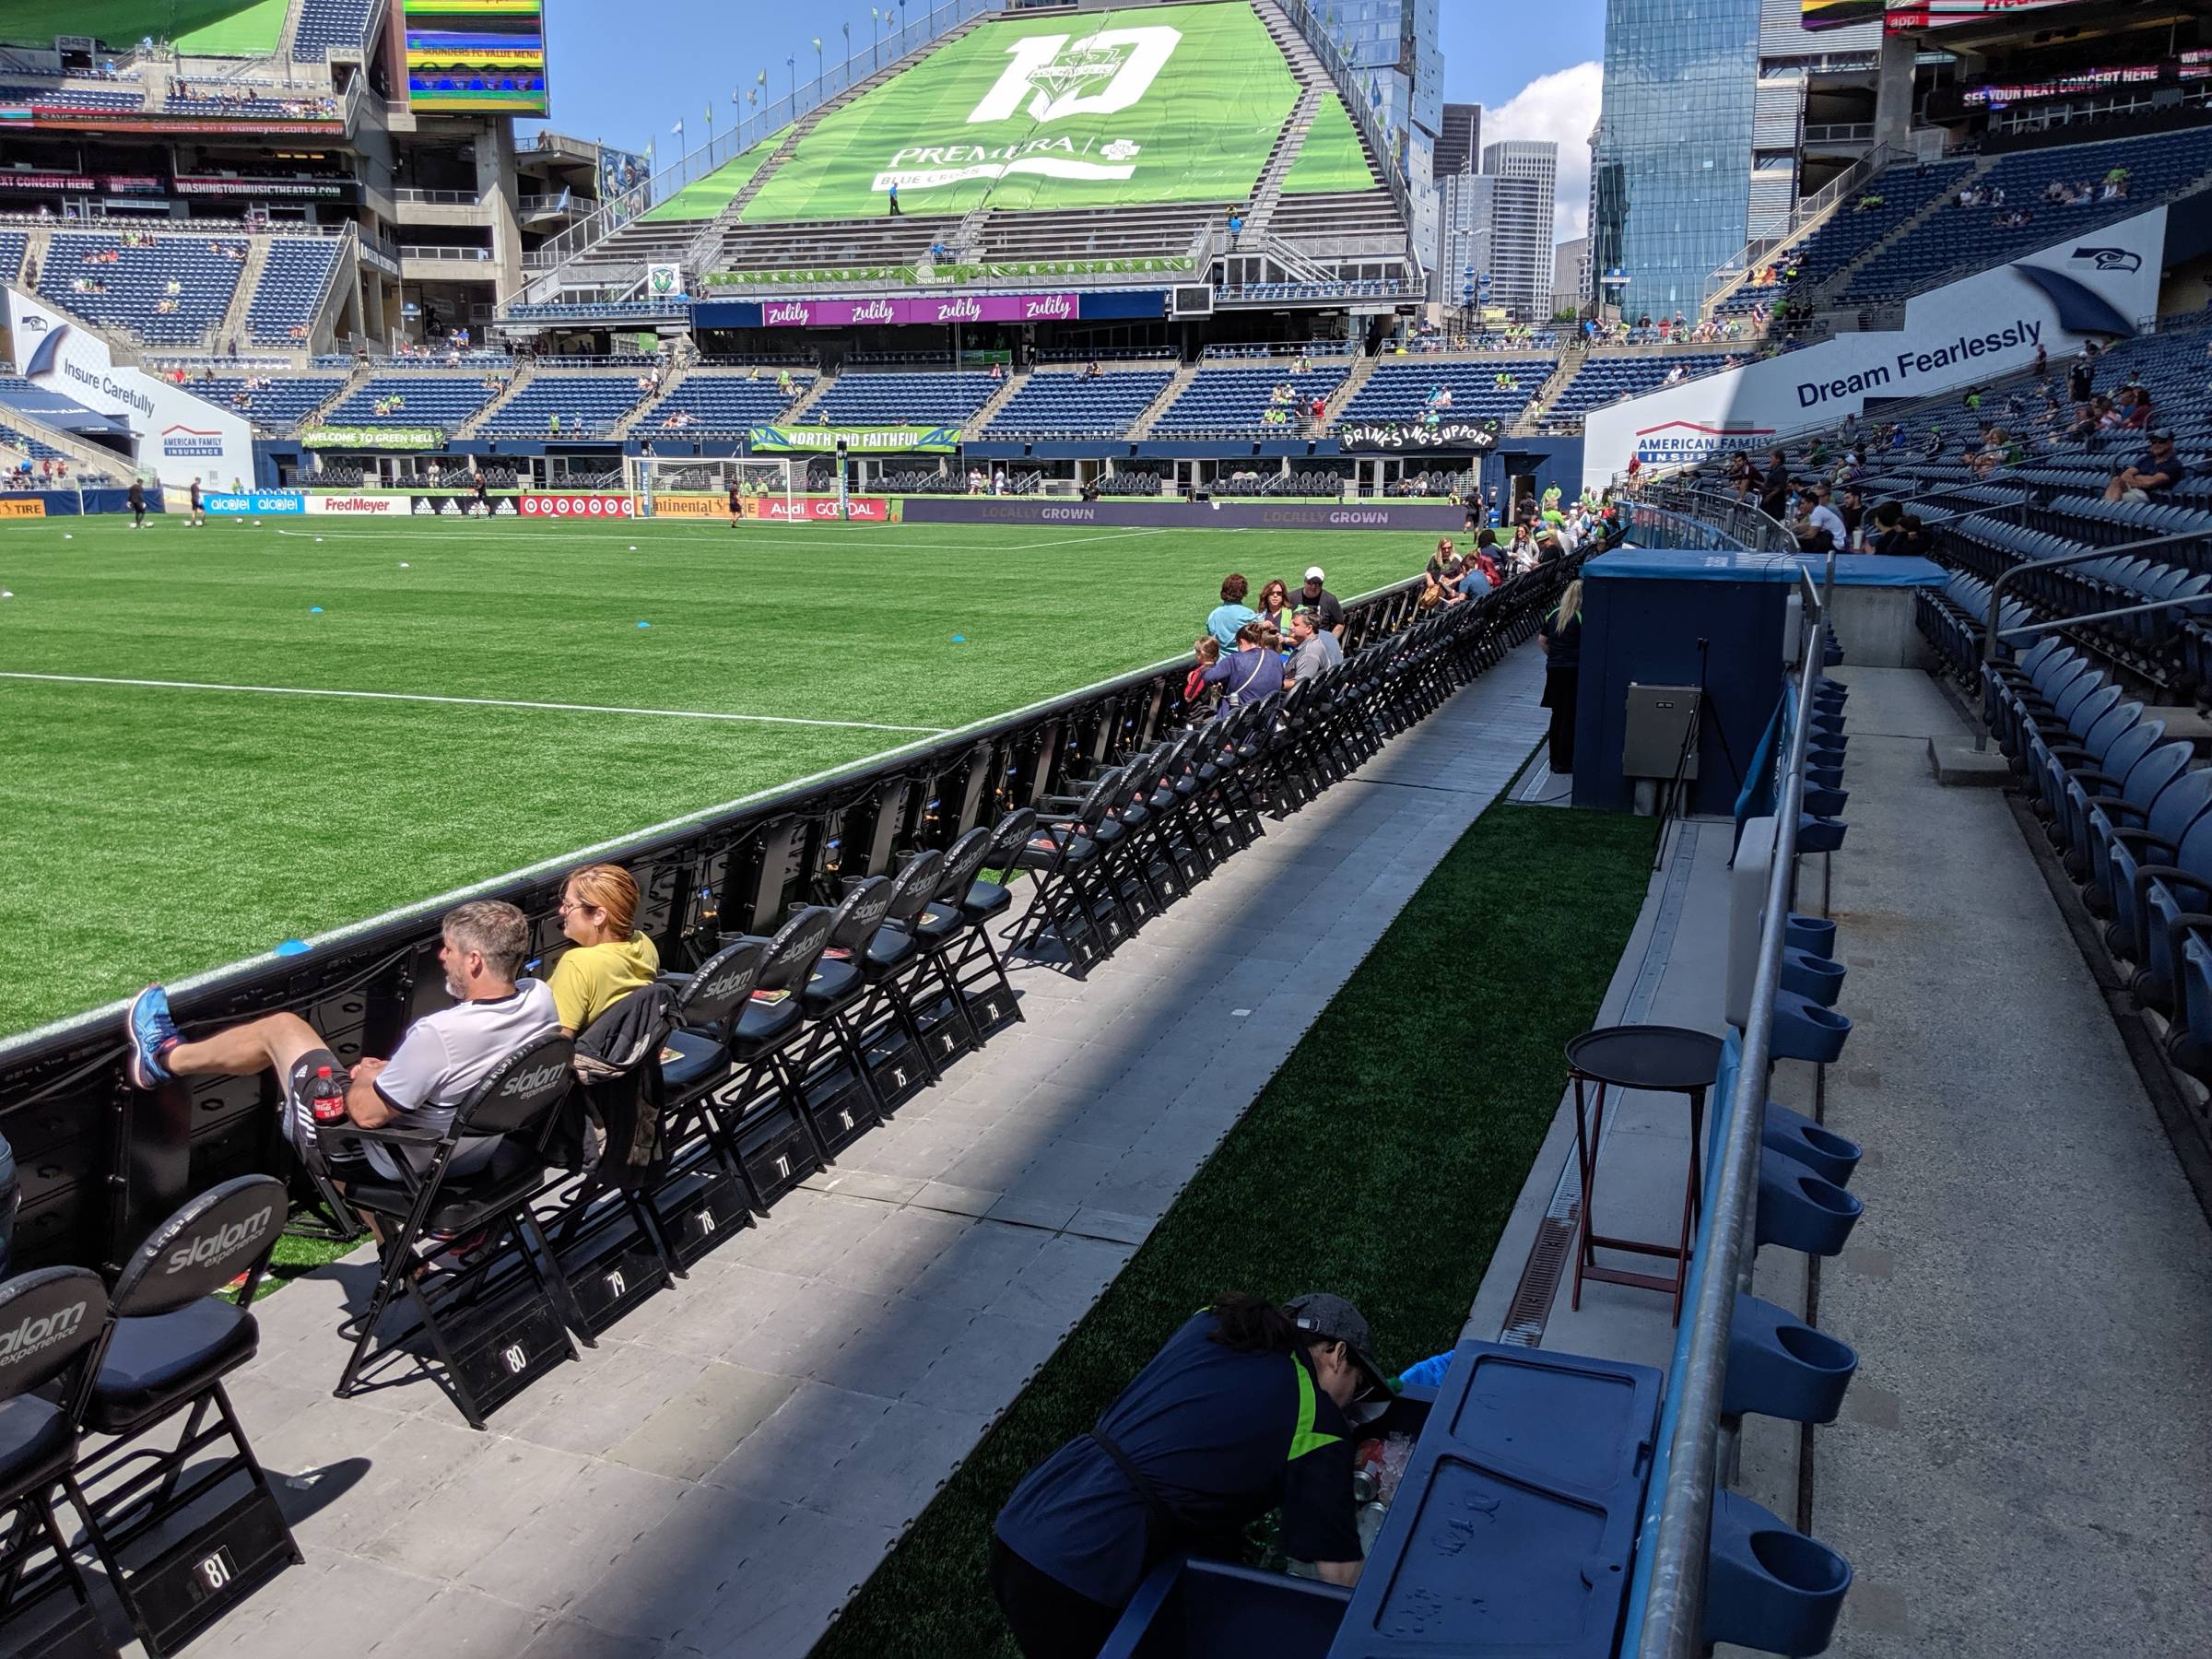 view of pitchside seats